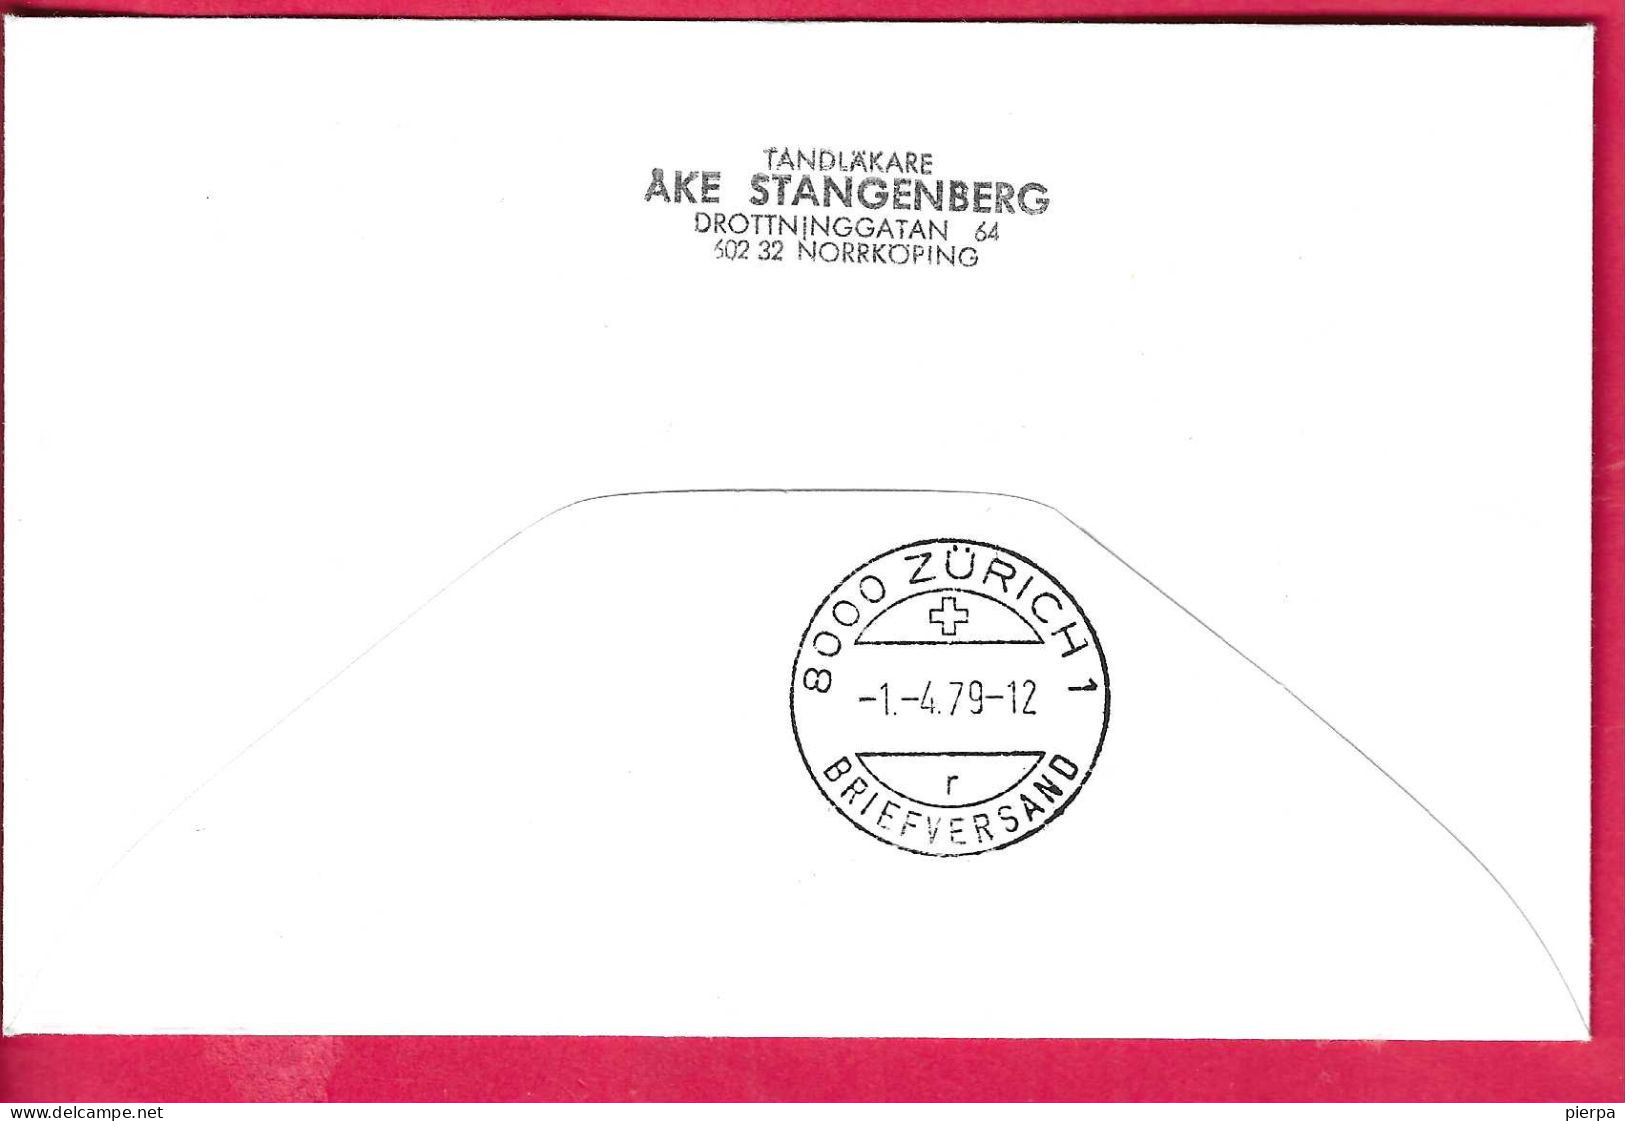 SVERIGE - FIRST DC-9 NON STOP FLIGHT FROM GOTEBORG TO ZURICH * 1.4.1979* ON OFFICIAL ENVELOPE - Covers & Documents